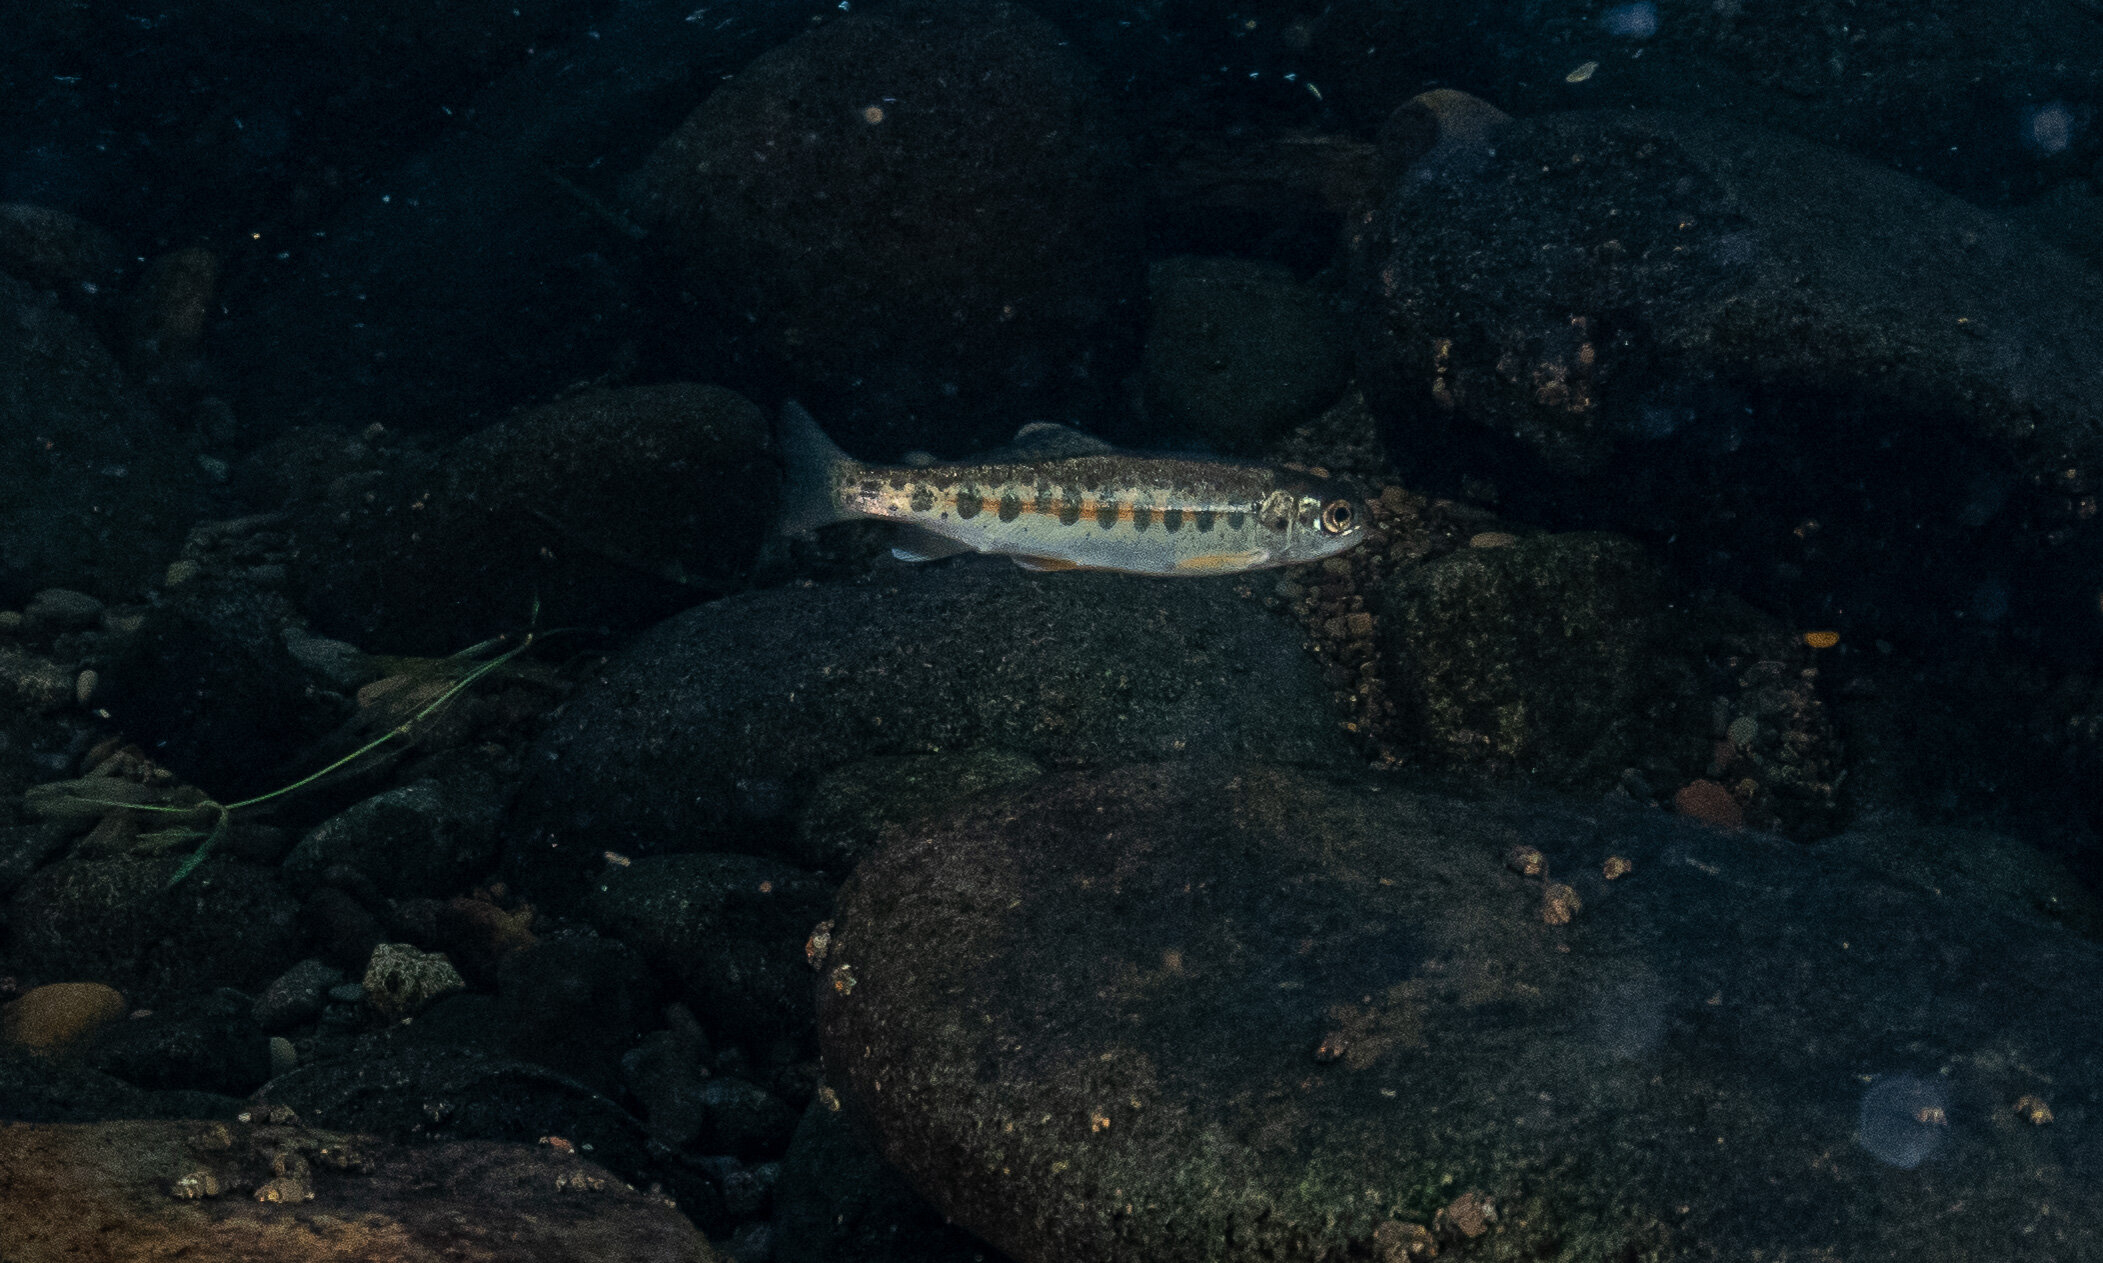 Steehead smolt by Laura Tesler